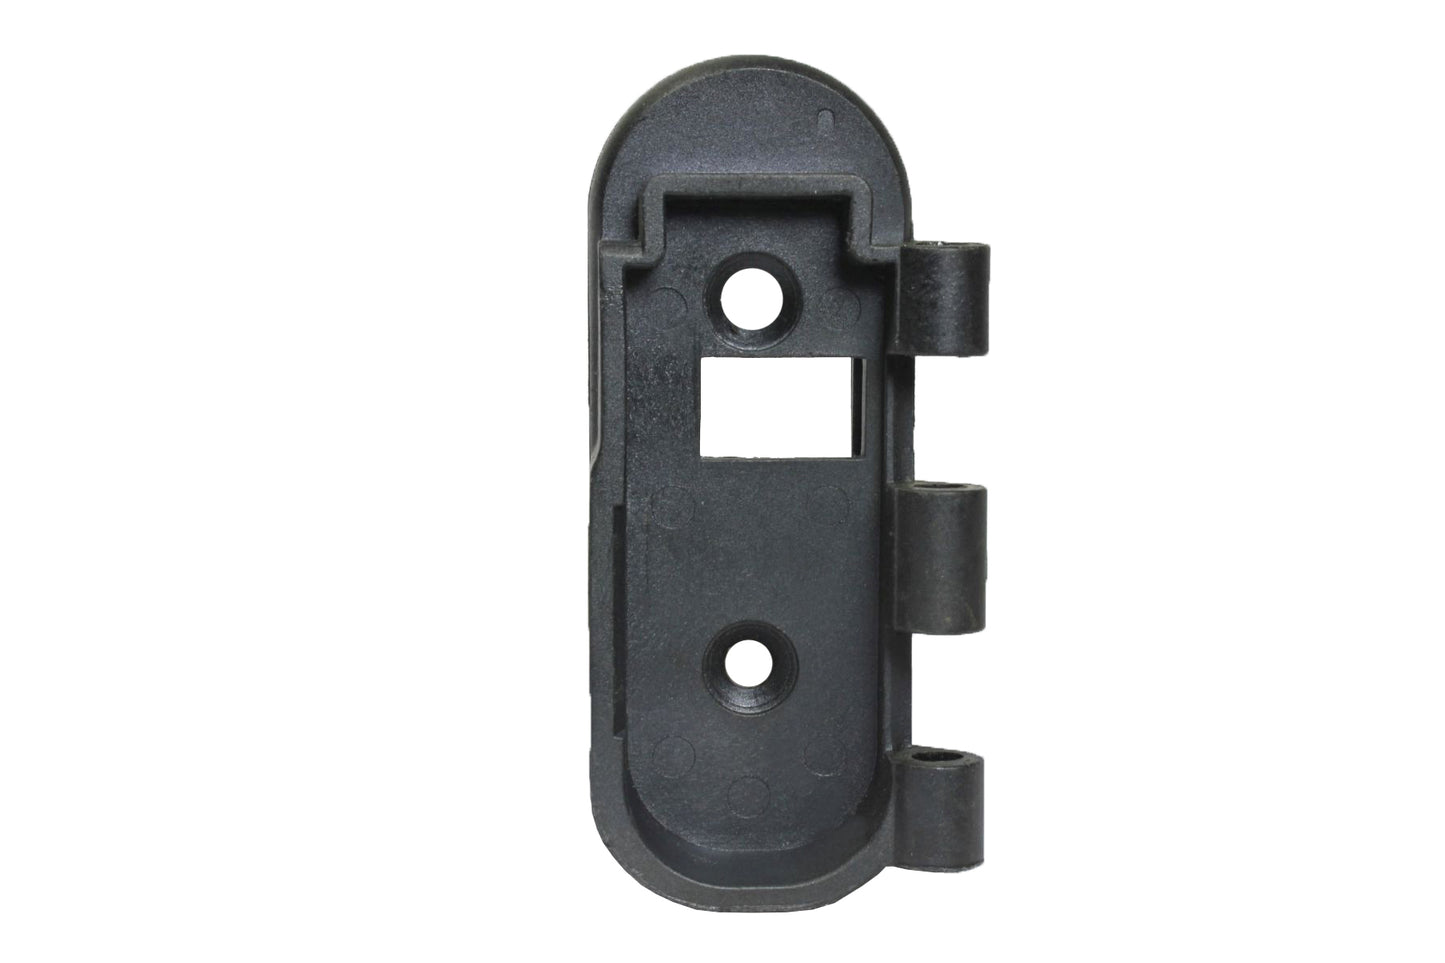 SCAR Folding Stock Adapter Plate Replacement | Black